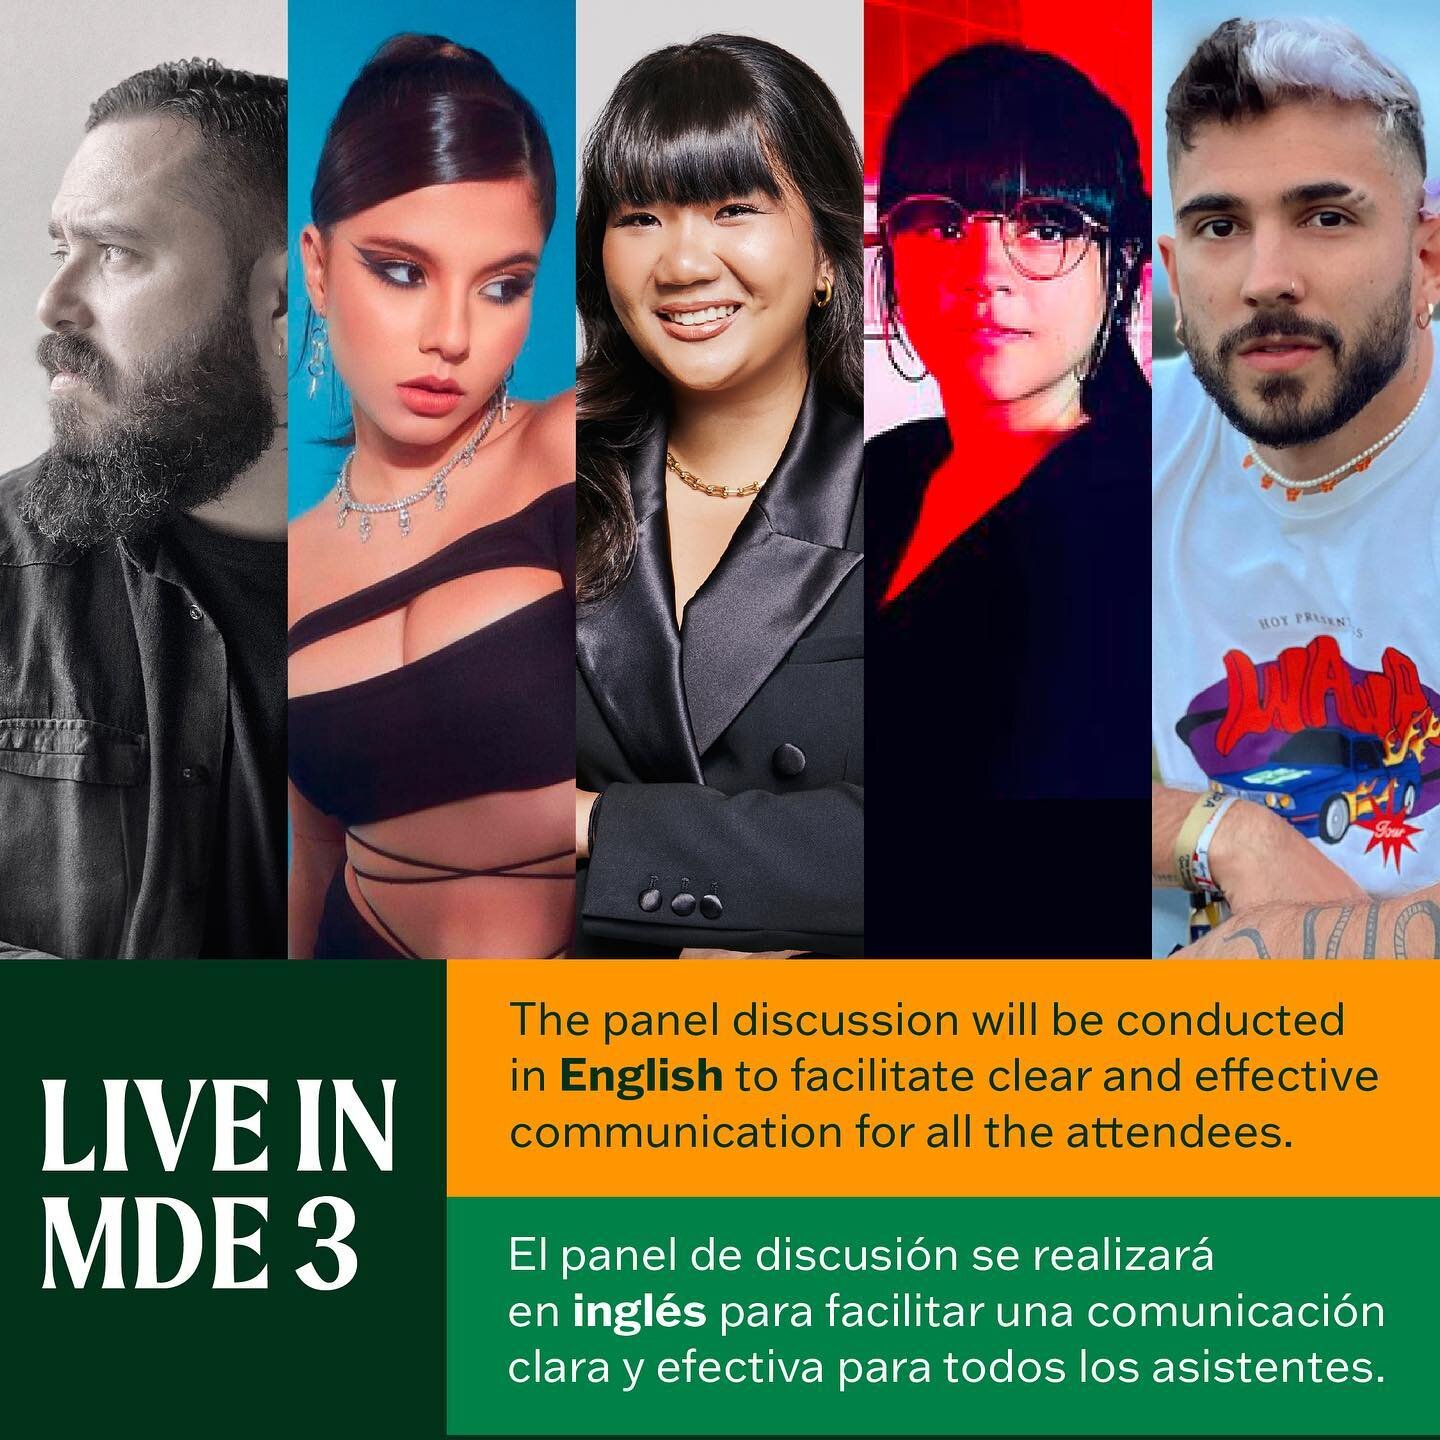 Live in MDE 3 is happening today! 🎊

We're eagerly looking forward to seeing you all from 2 PM for an unforgettable afternoon. 

🚨 Just a final reminder: the panel discussion will be held in English to cater to our international audience. 

Looking